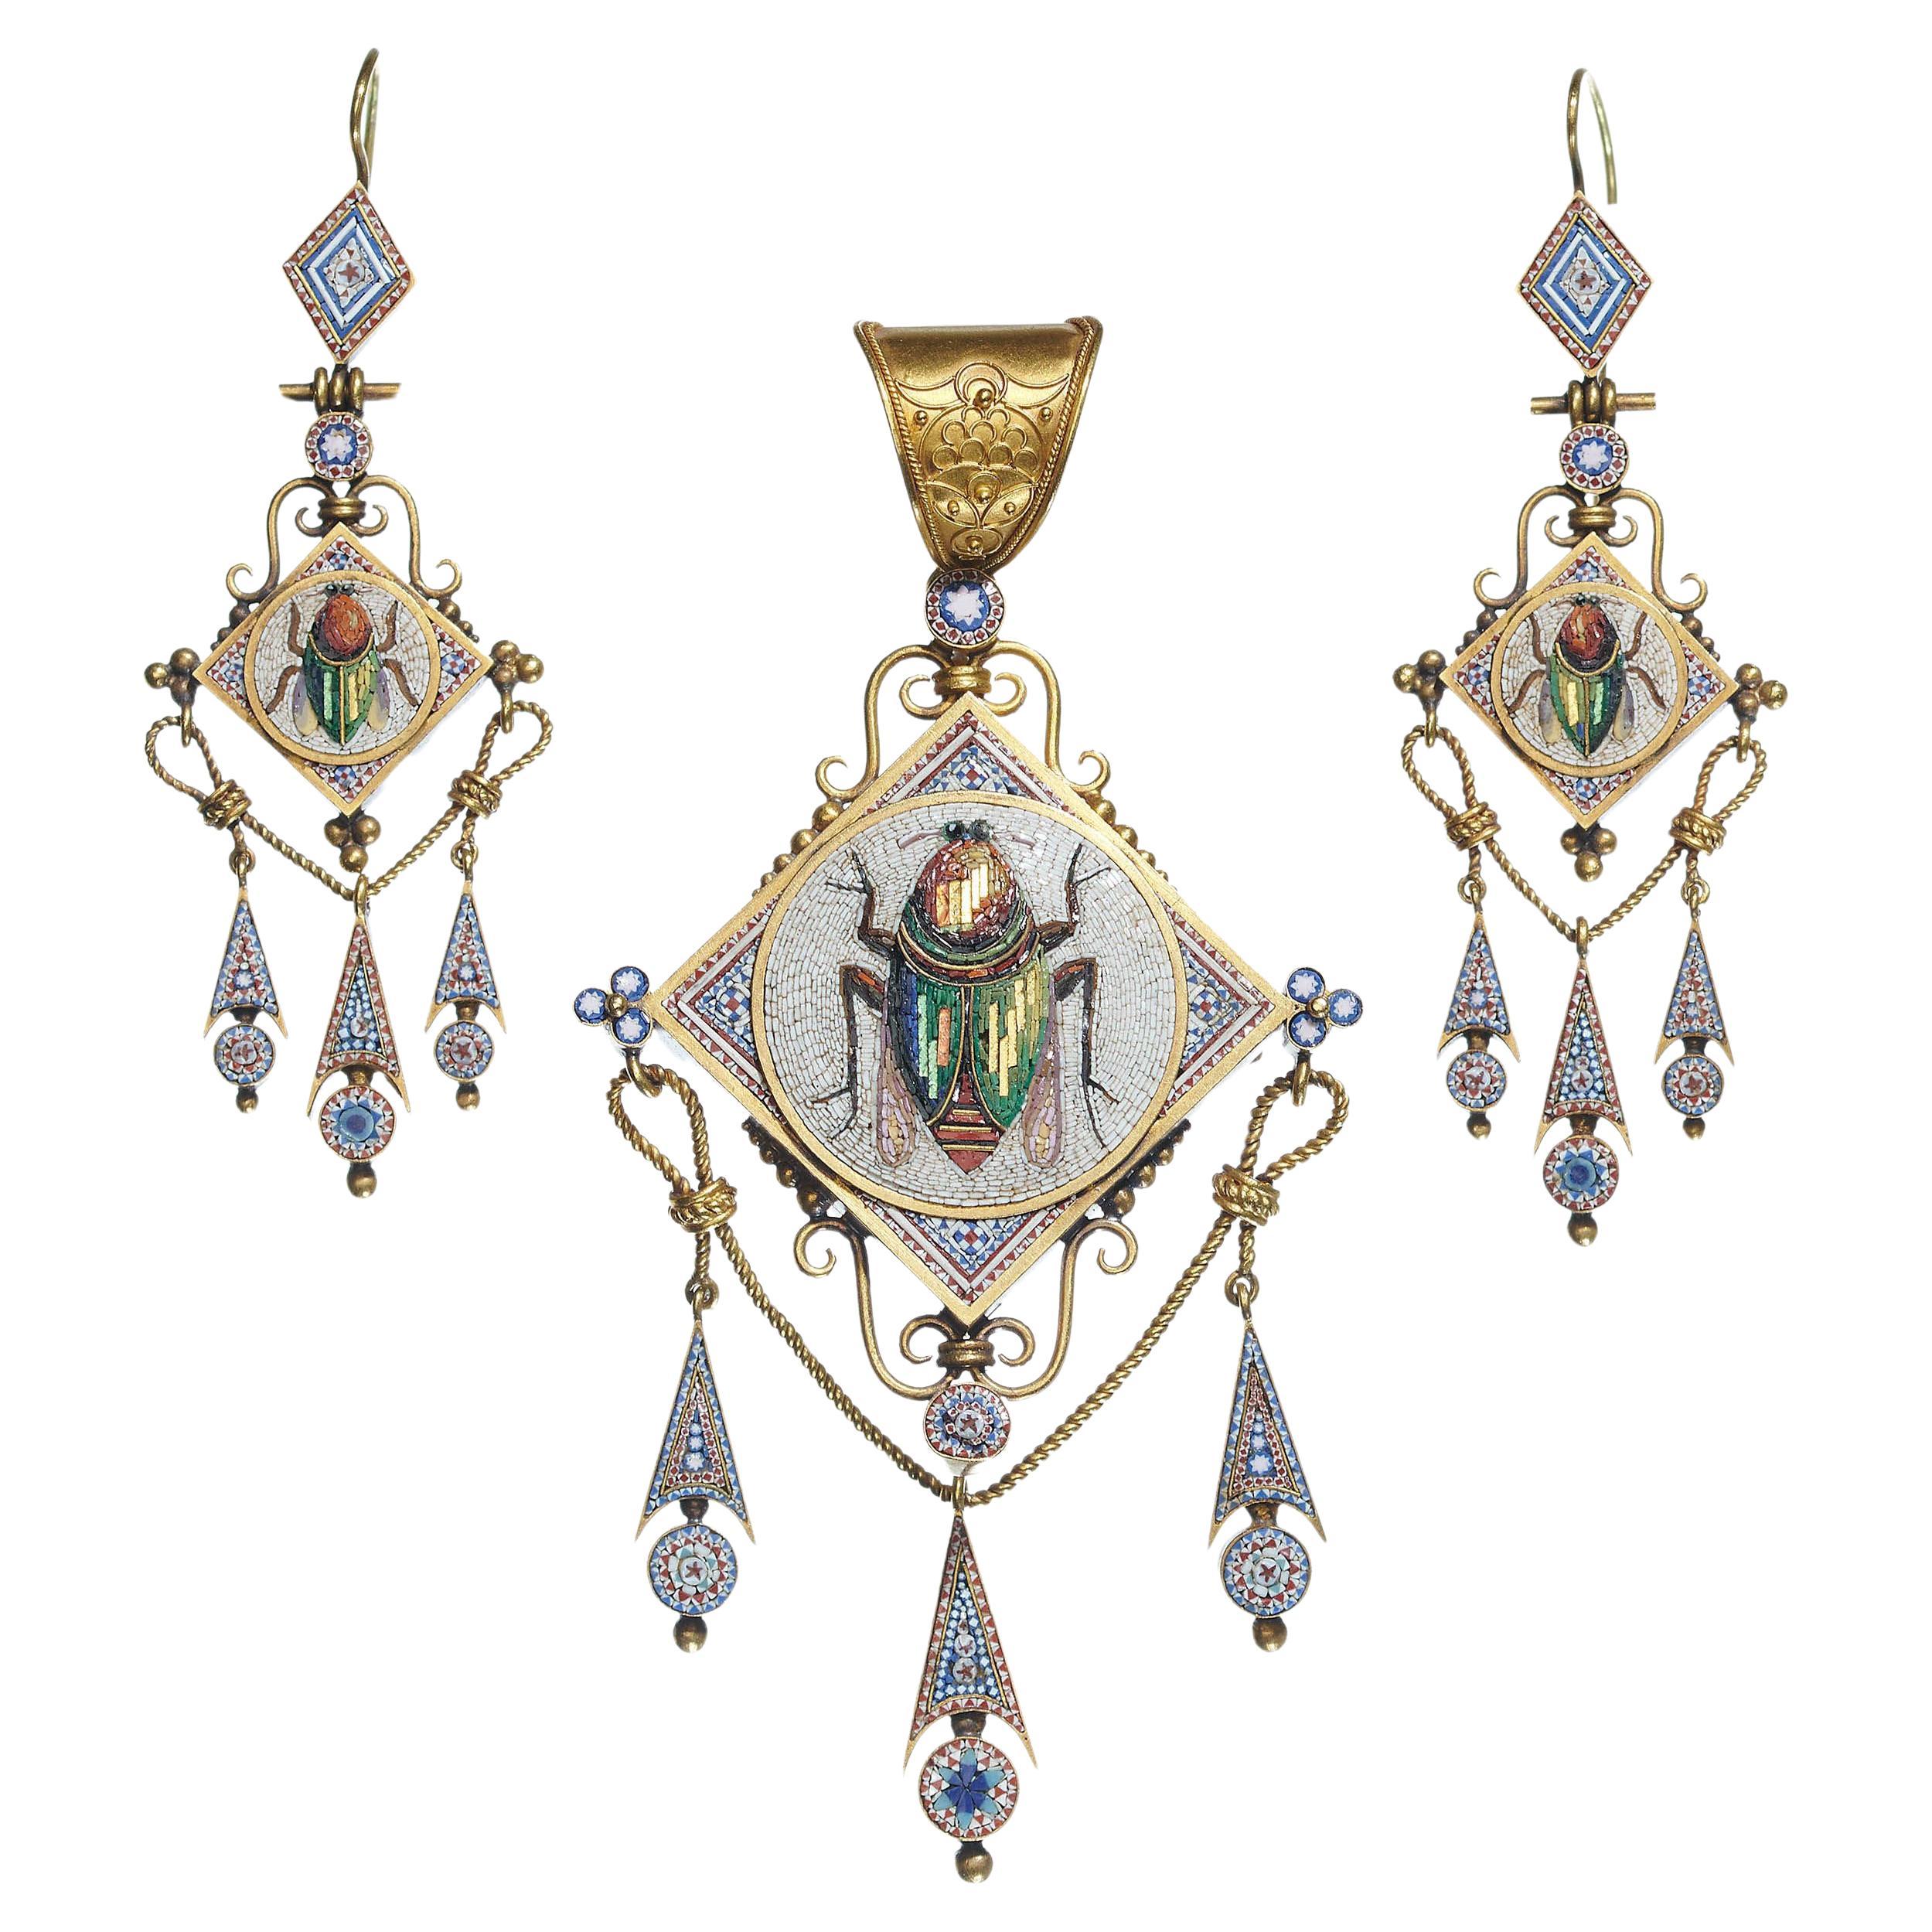 Antique Italian Micromosaic Gold Brooch-Pendant And Earrings Suite, Circa 1840 For Sale